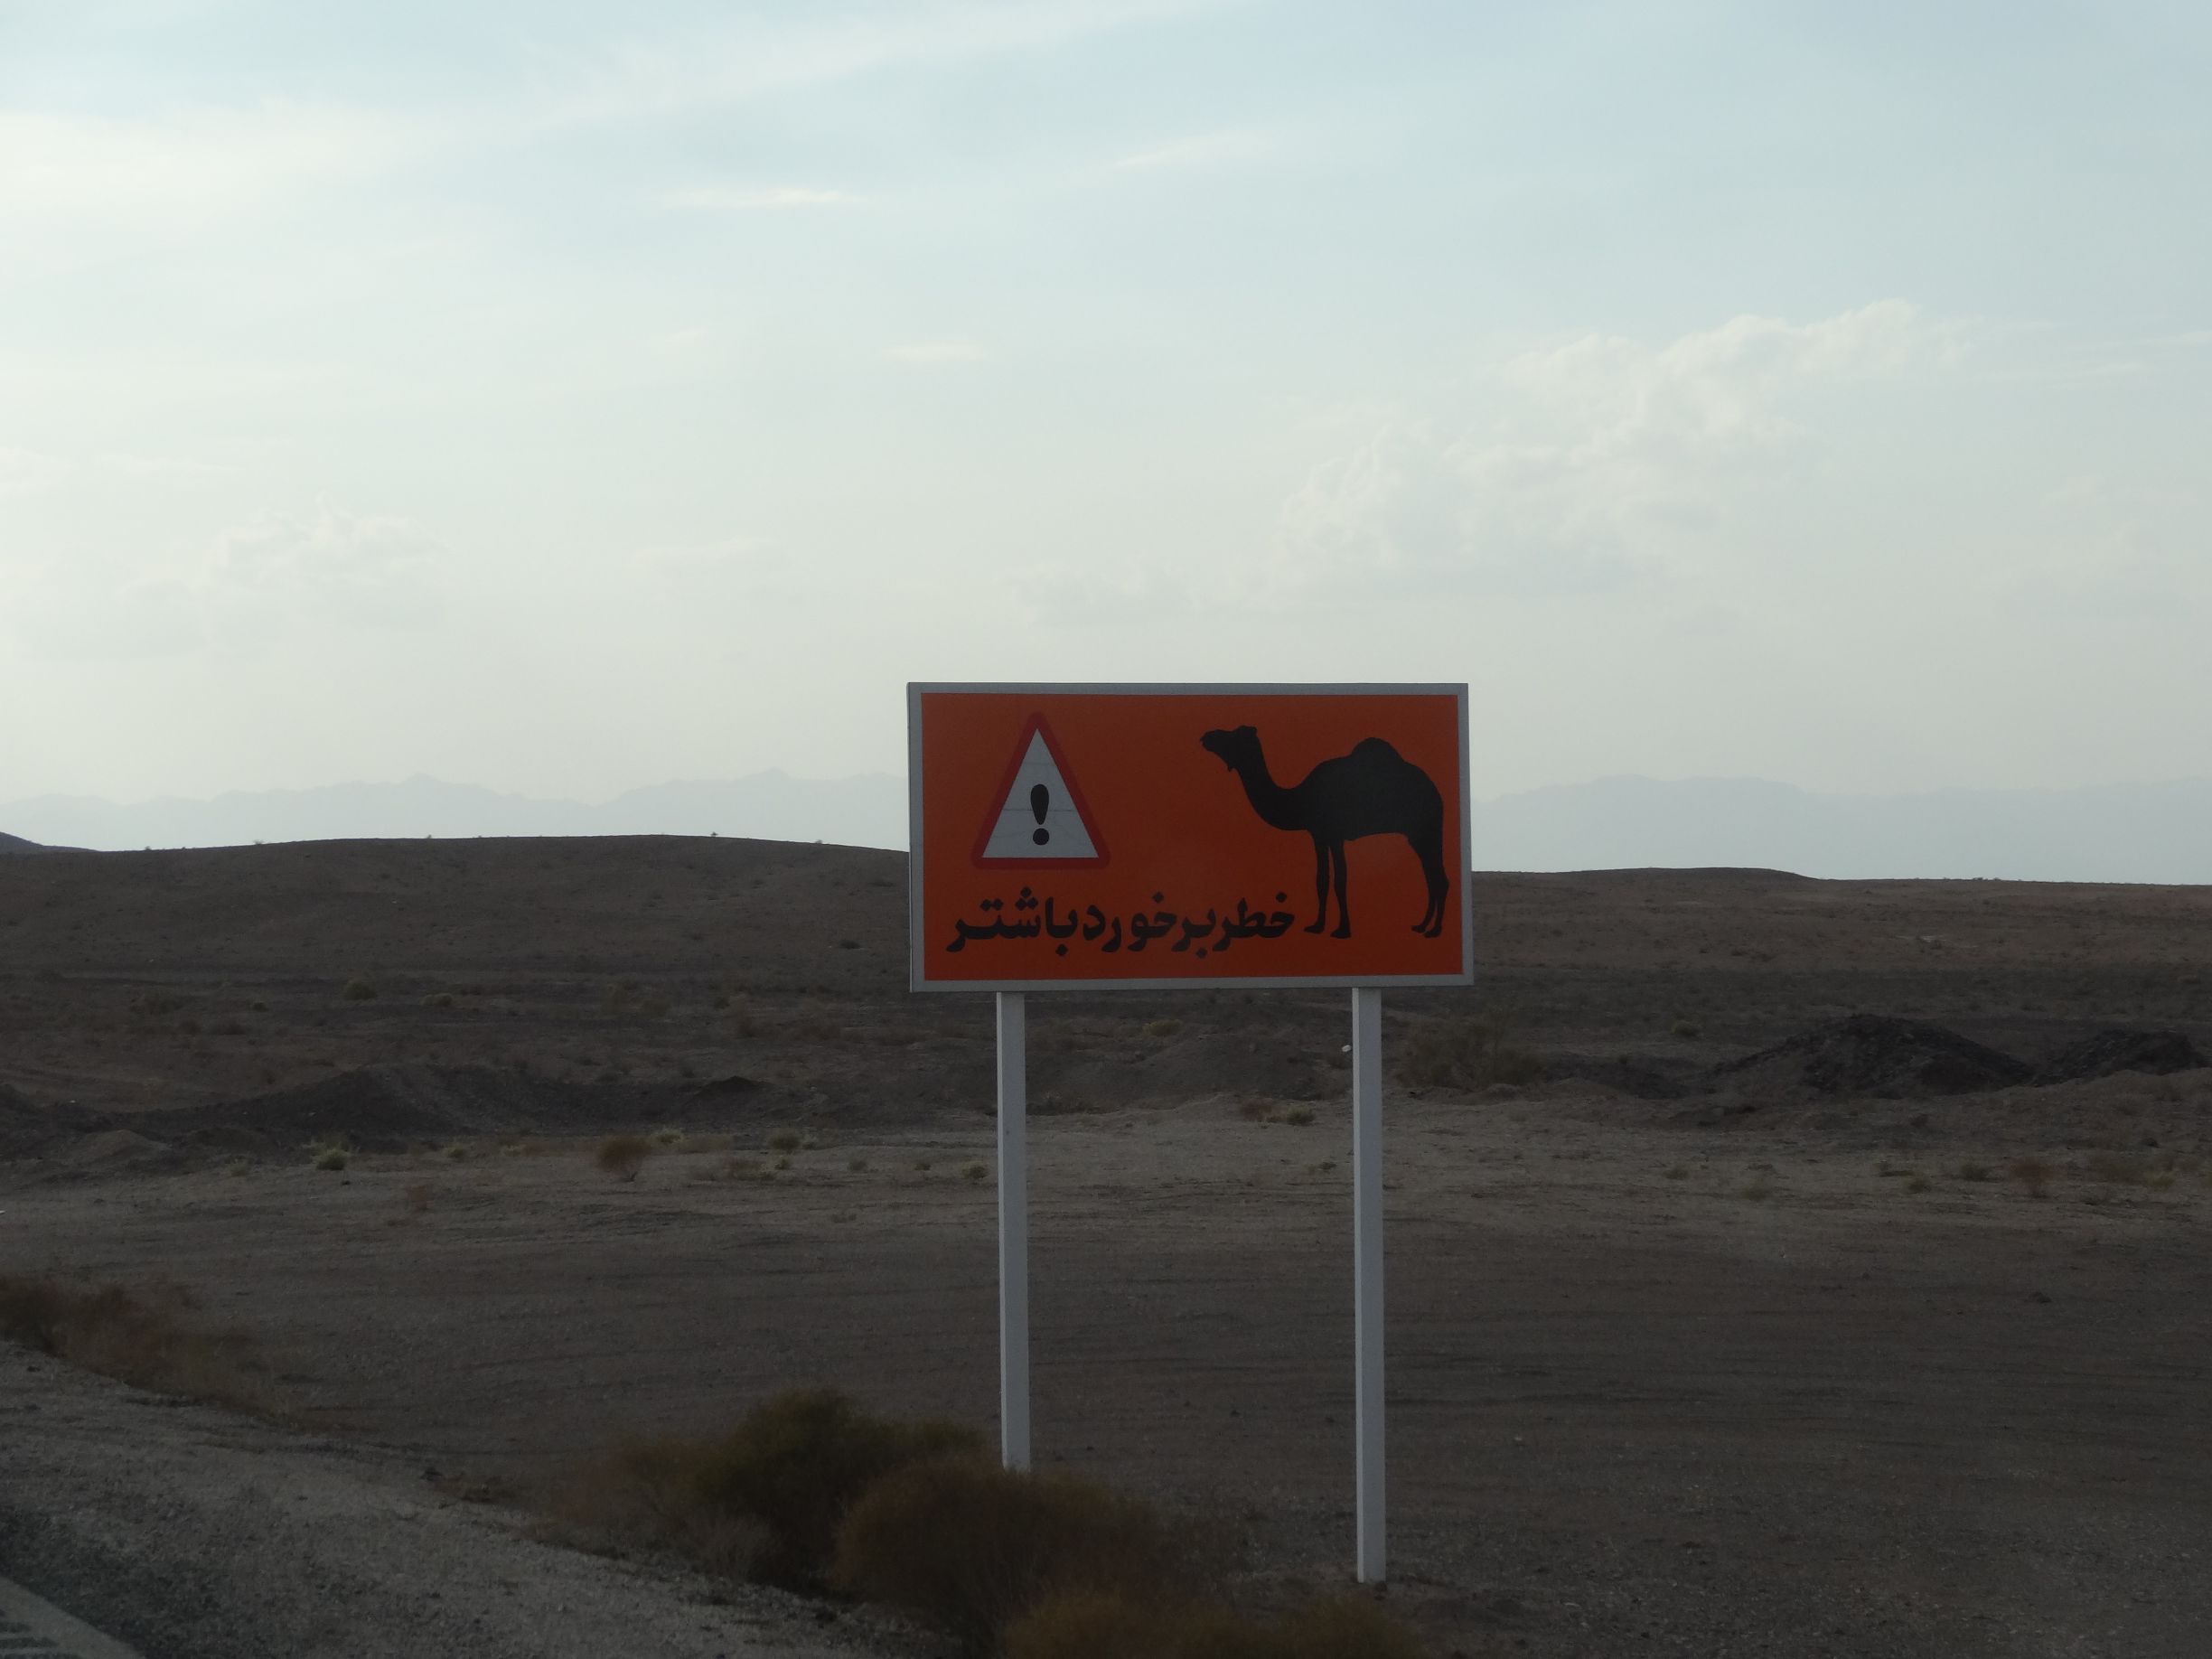 we understand this sign and also see many dromedaries in the deserts